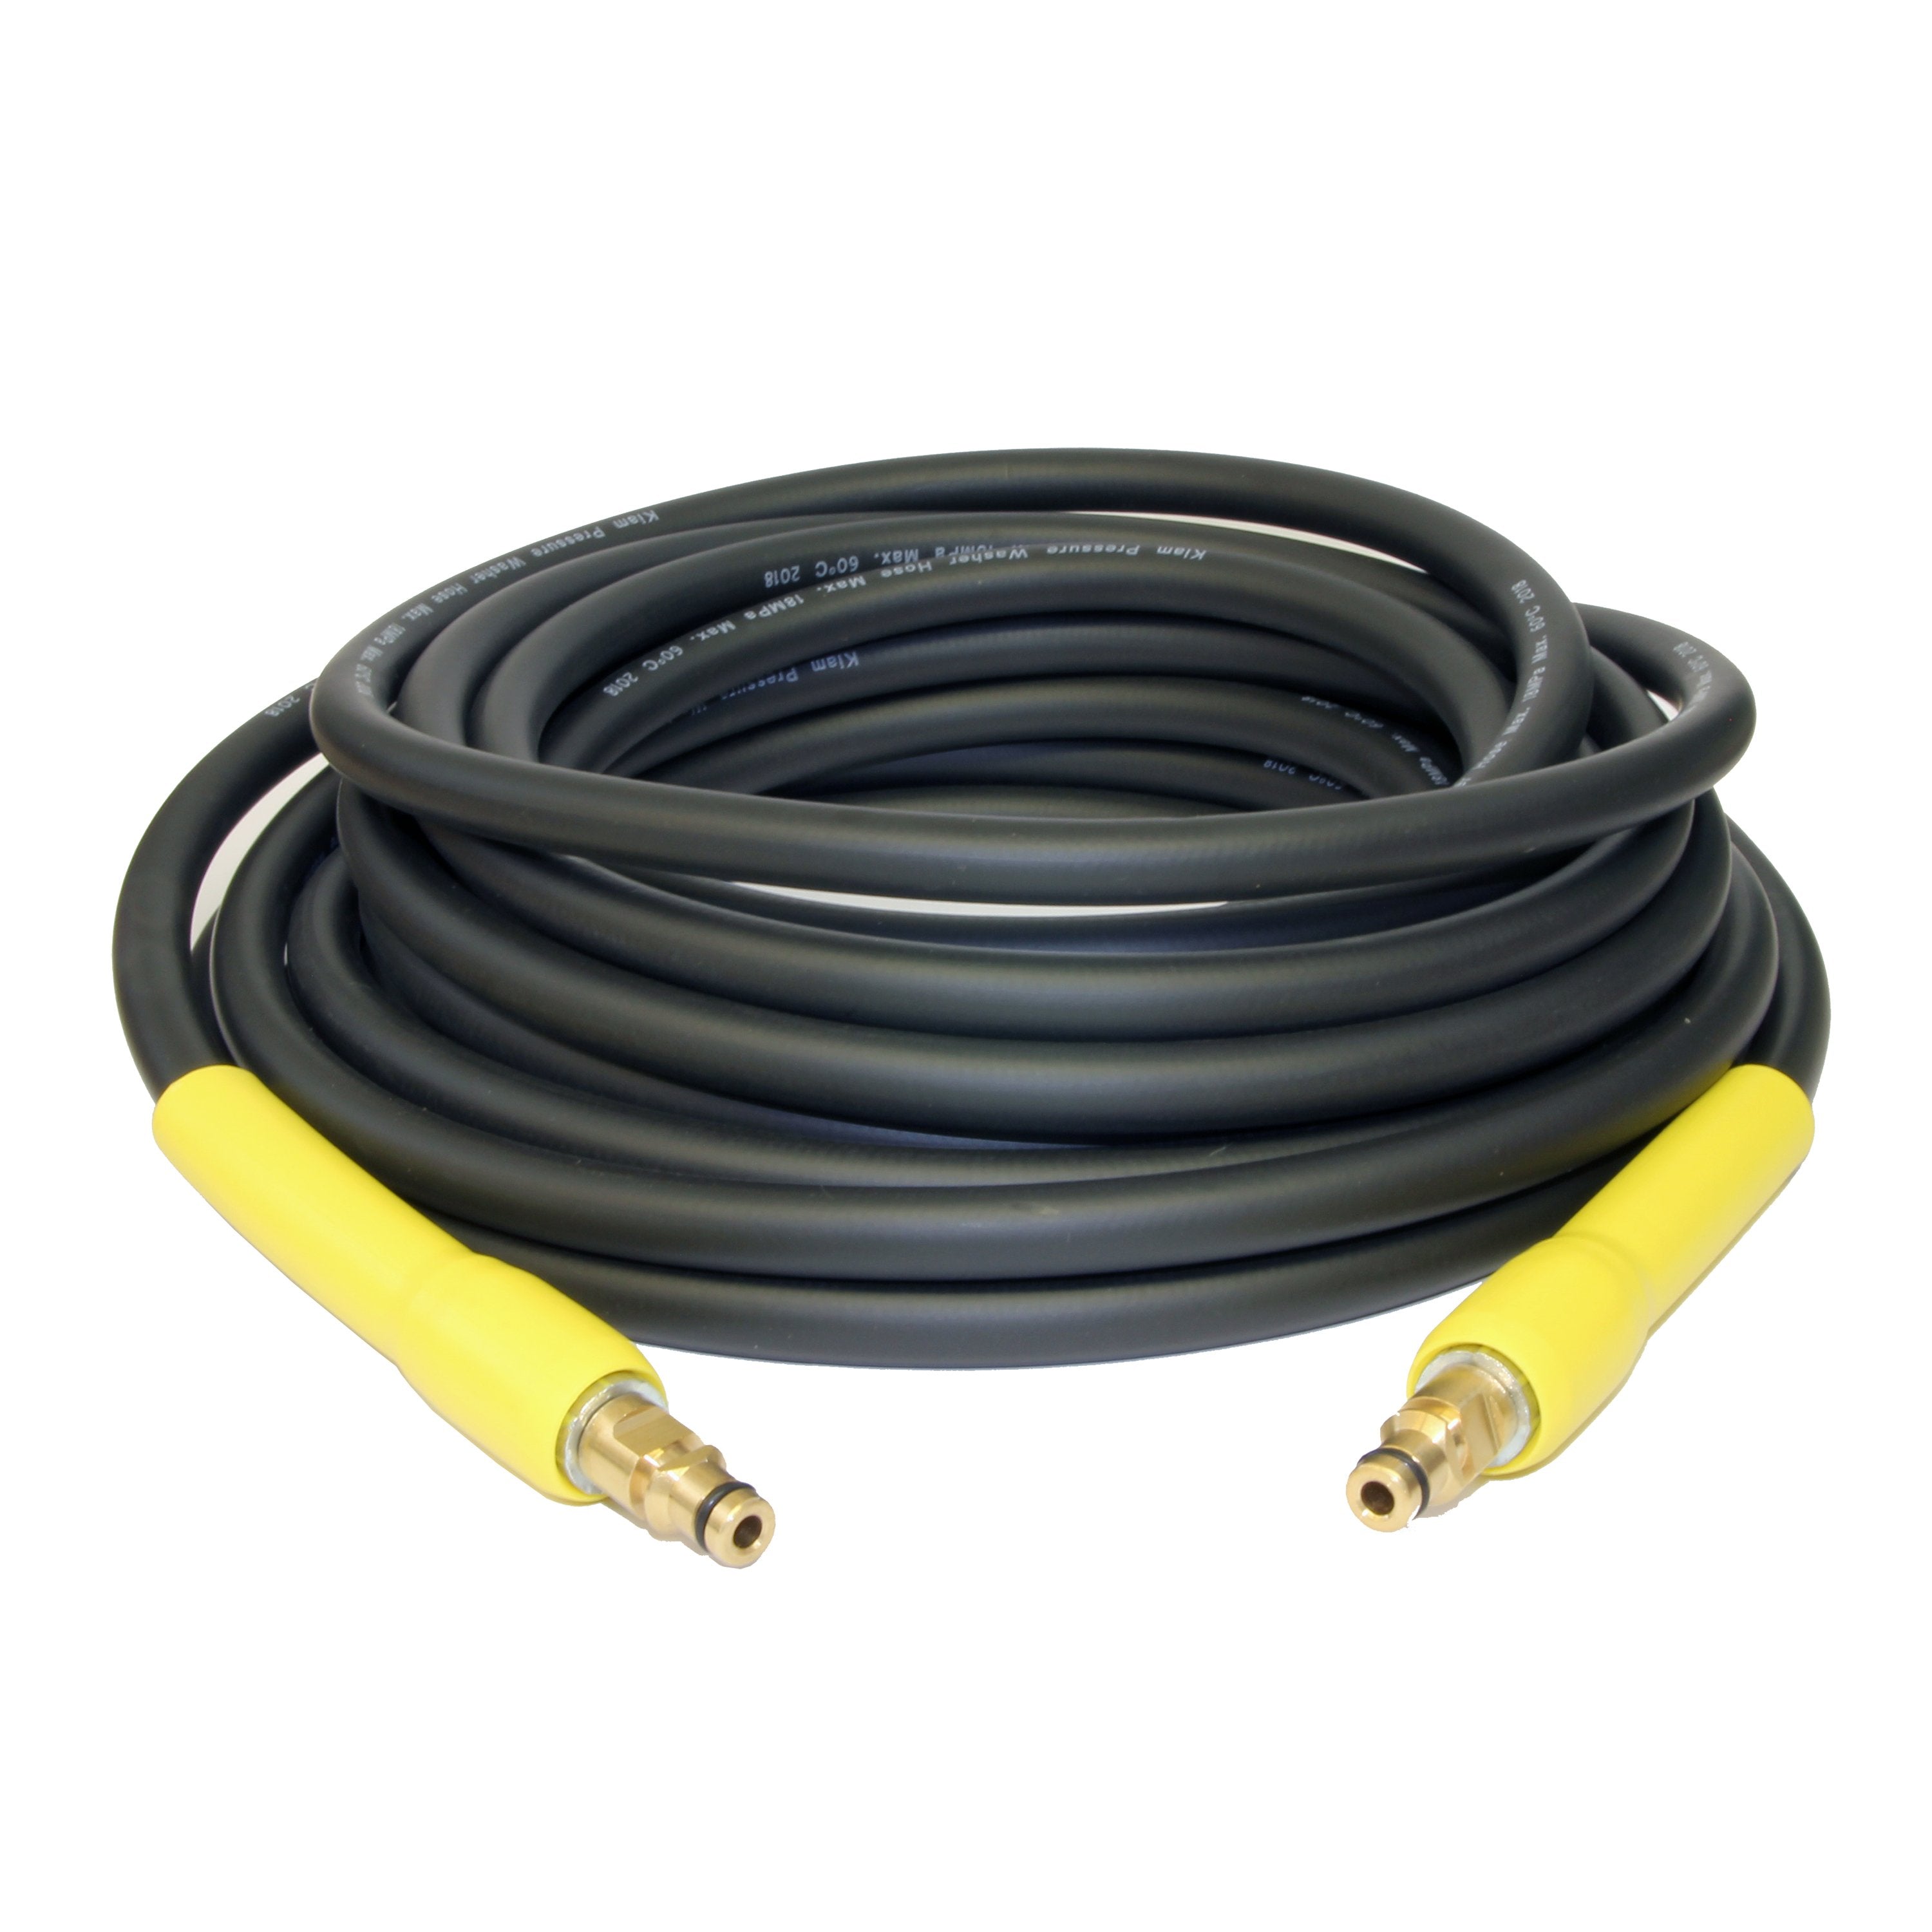 Pressure Washer Flexible Hoses, Replacement Hoses